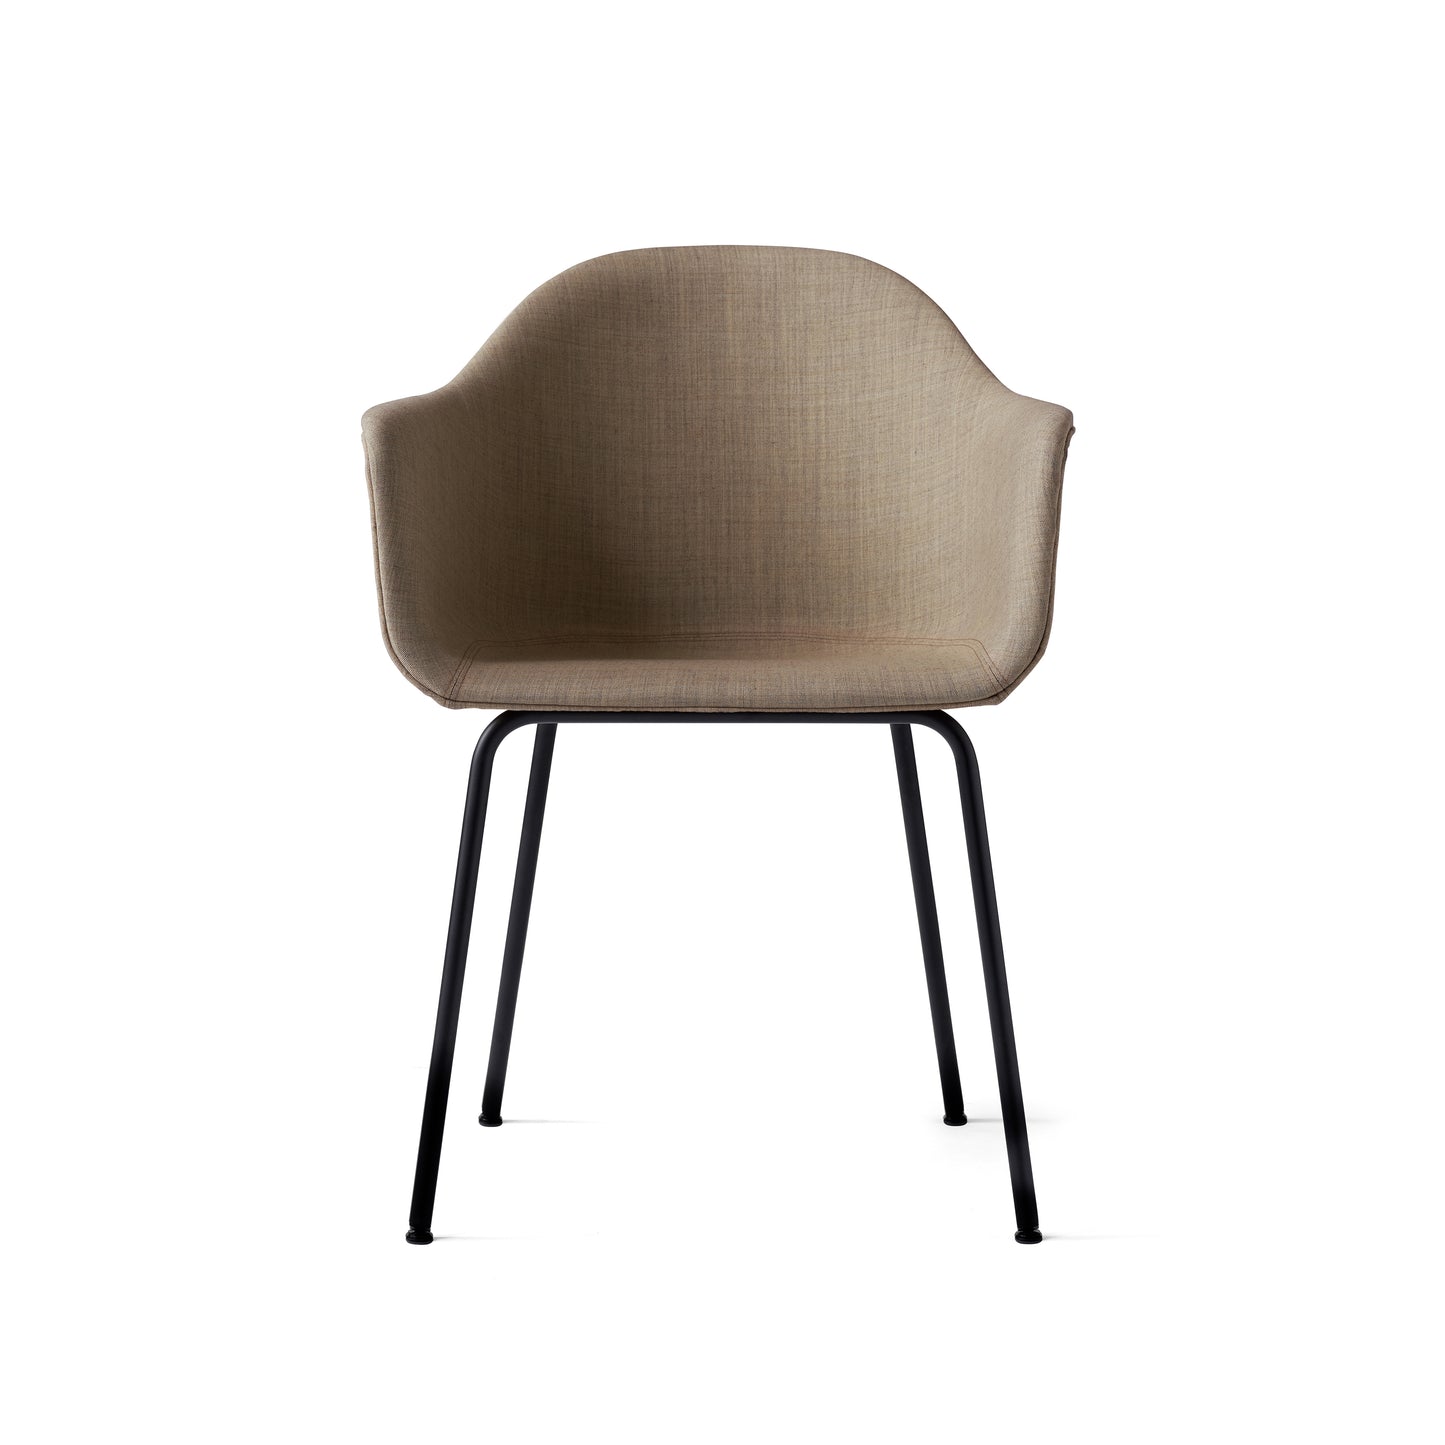 Harbour Chair - Fully Upholstered by Menu / Audo Copenhagen